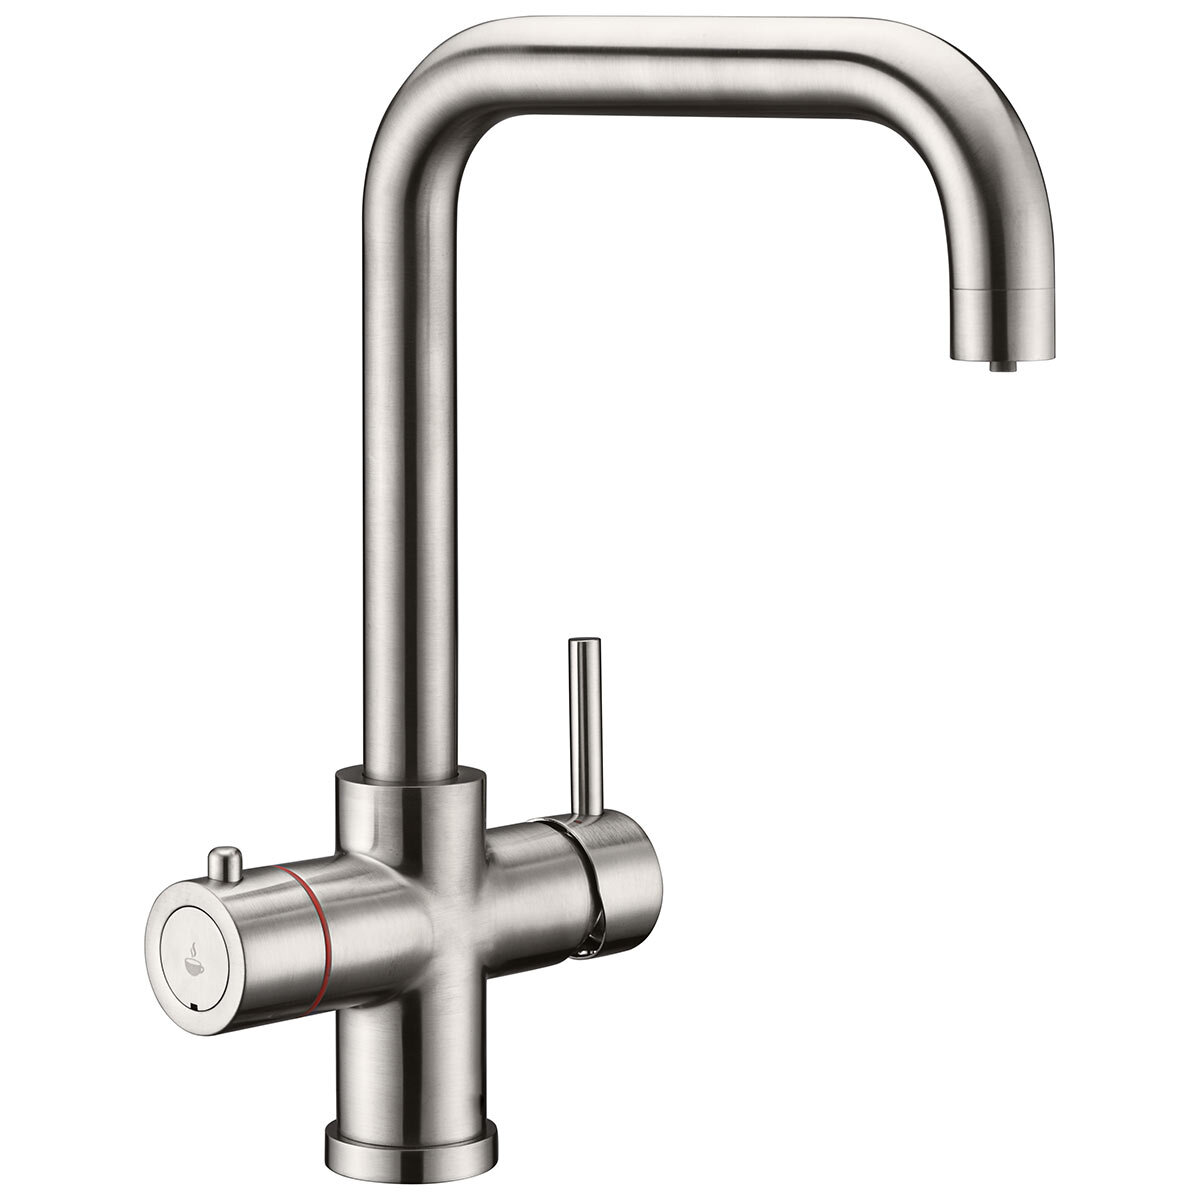 lead image of hot tap in brushed nickel